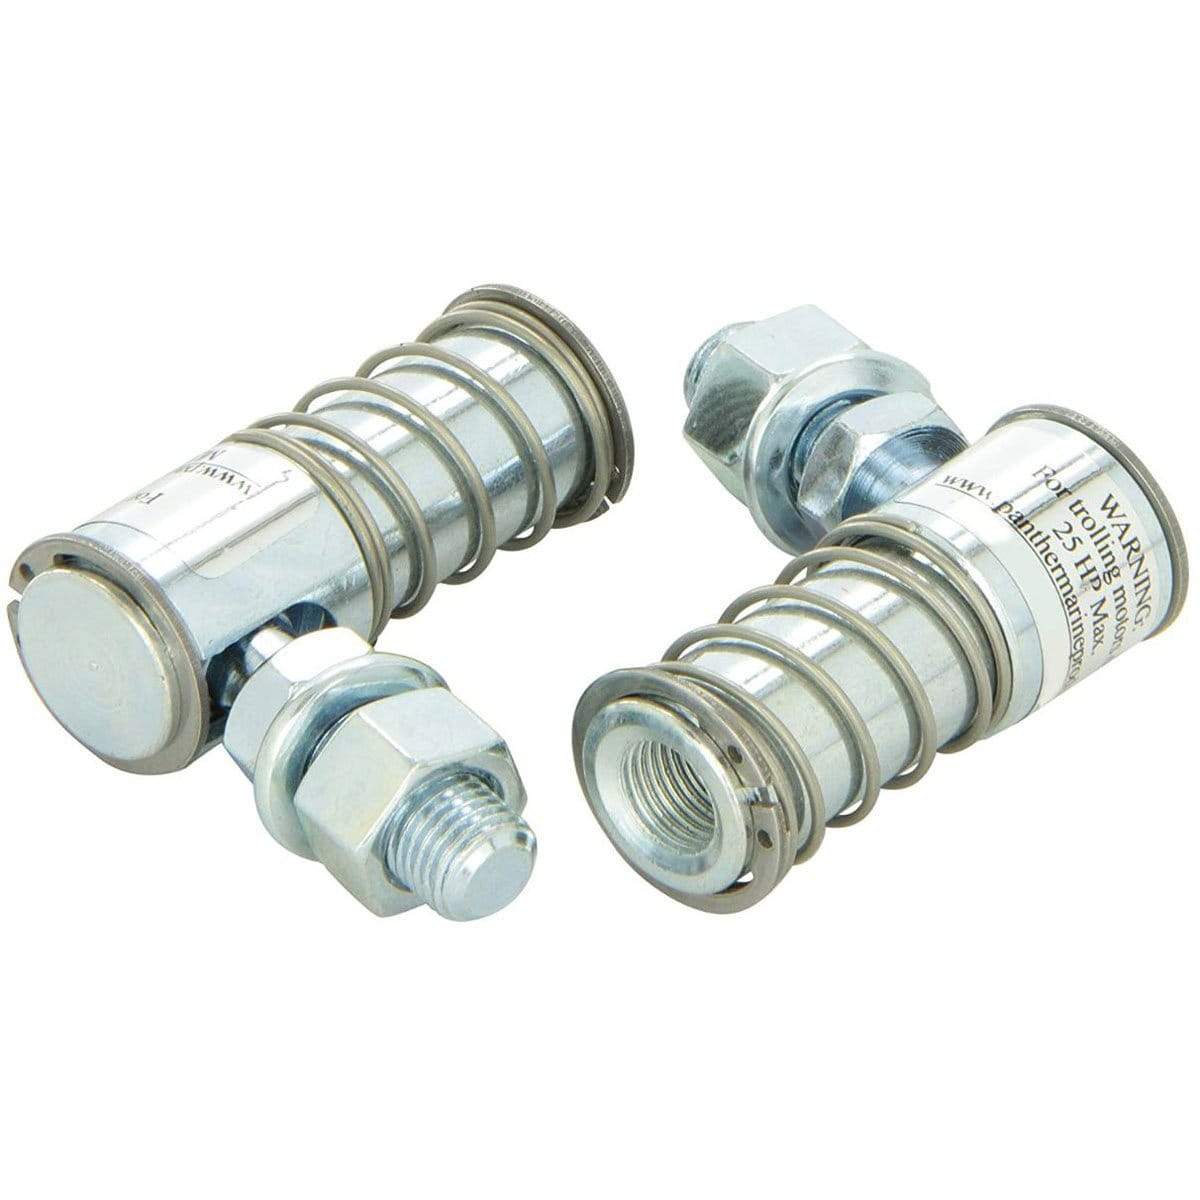 Marinetech Products Zinc Plated Quick Disconnects #55-5100